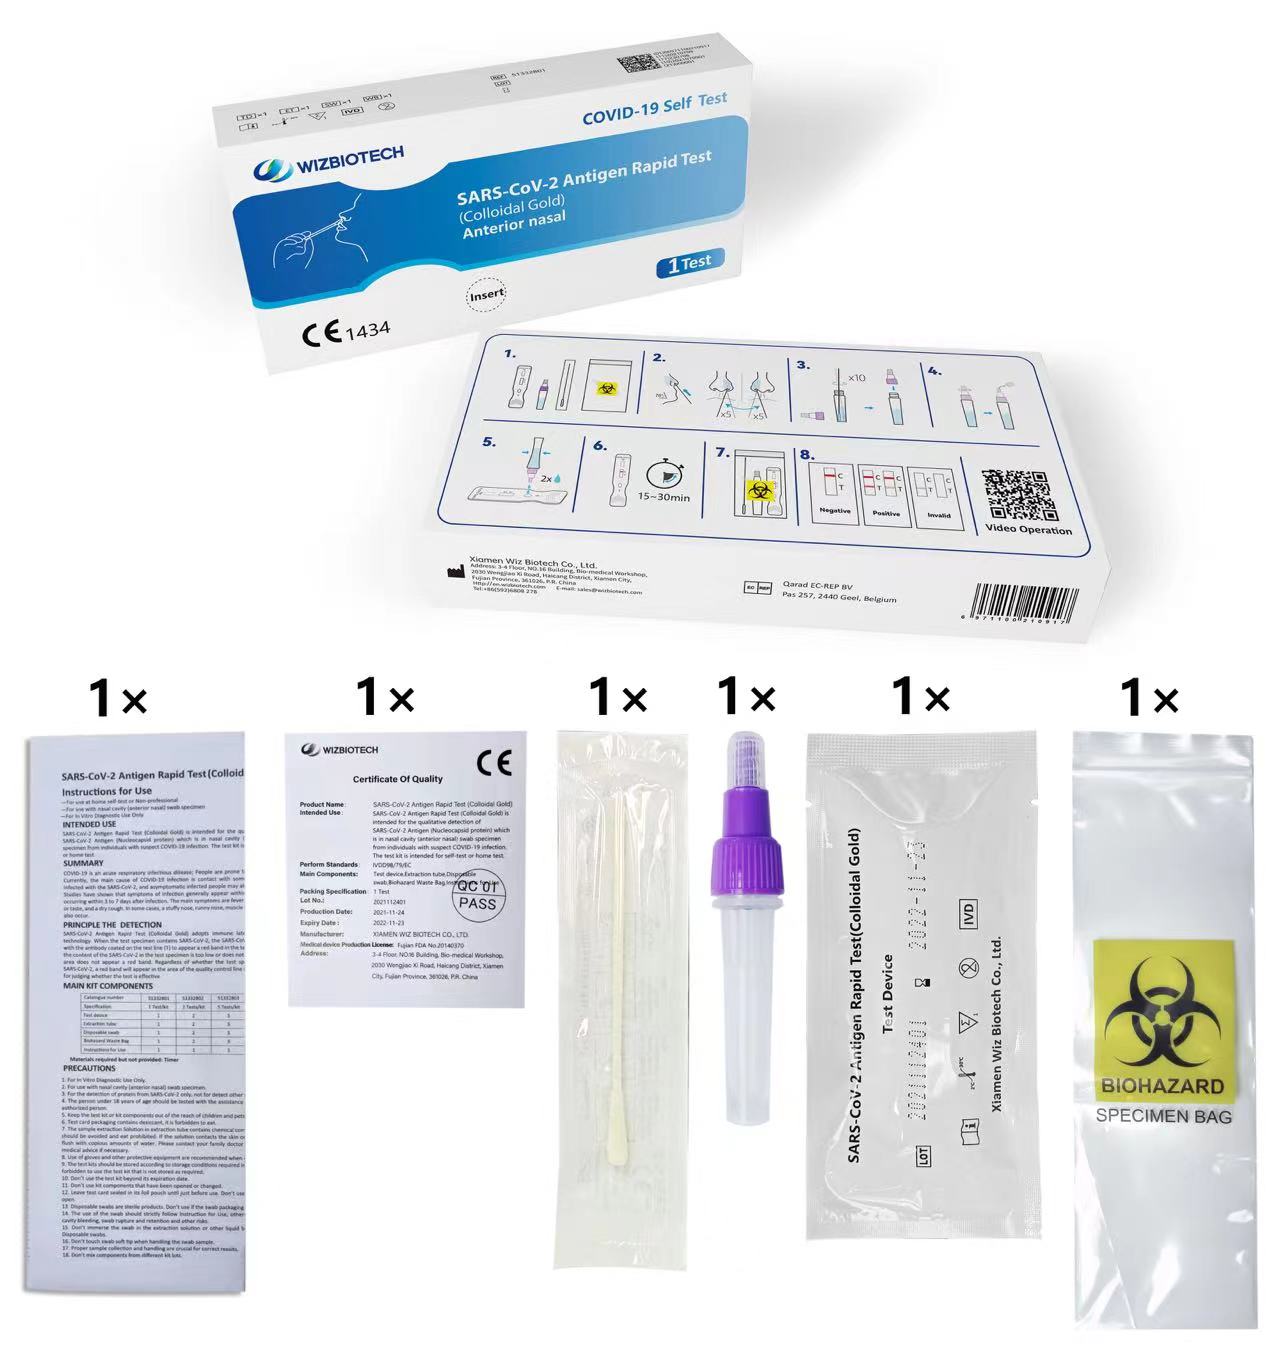 Mylasia approved SARS-CoV-2 antigen rapid test kit self testing Featured Image